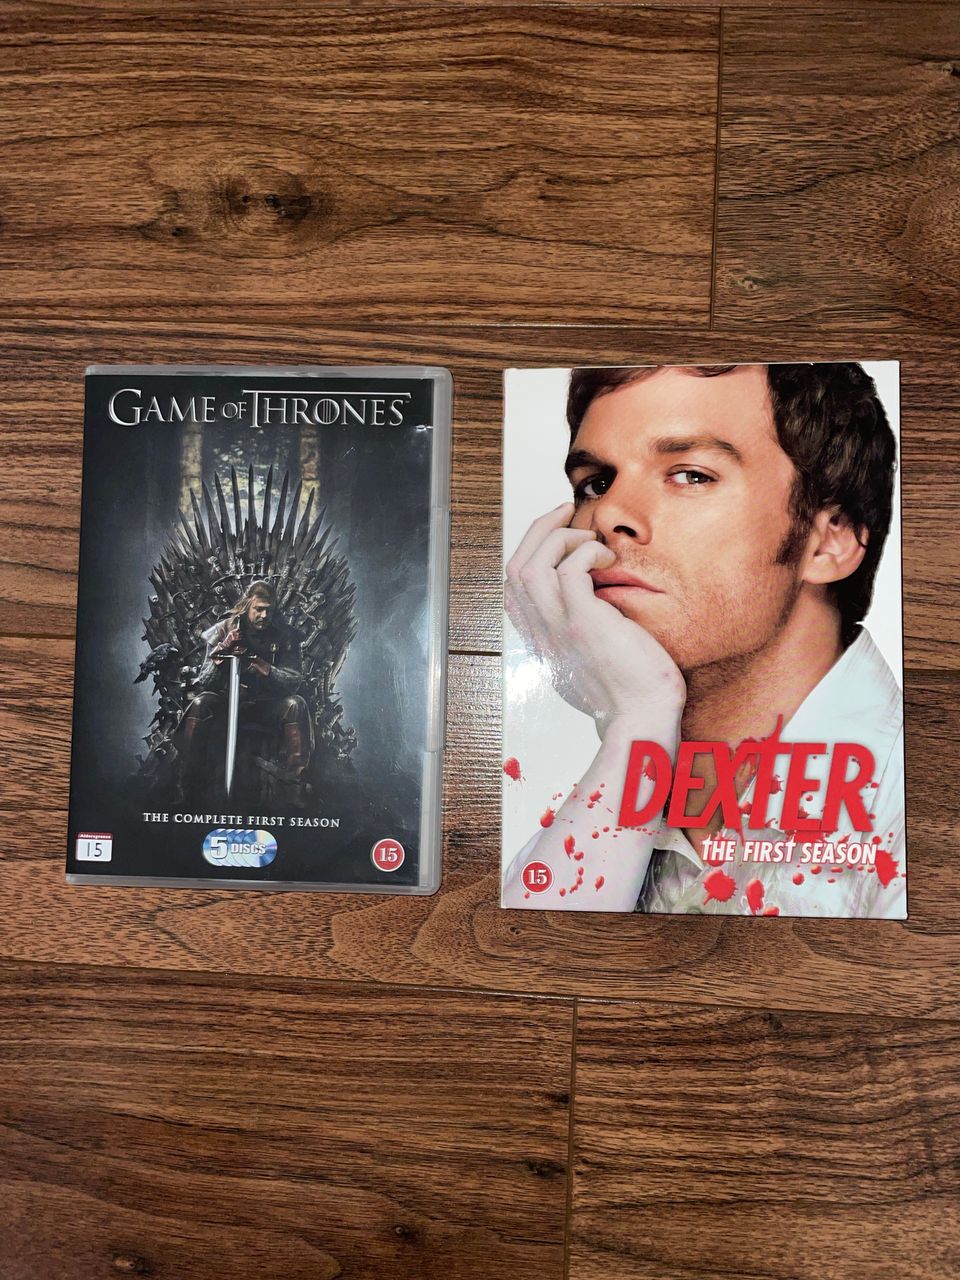 Game of thrones+ Dexter complete first season